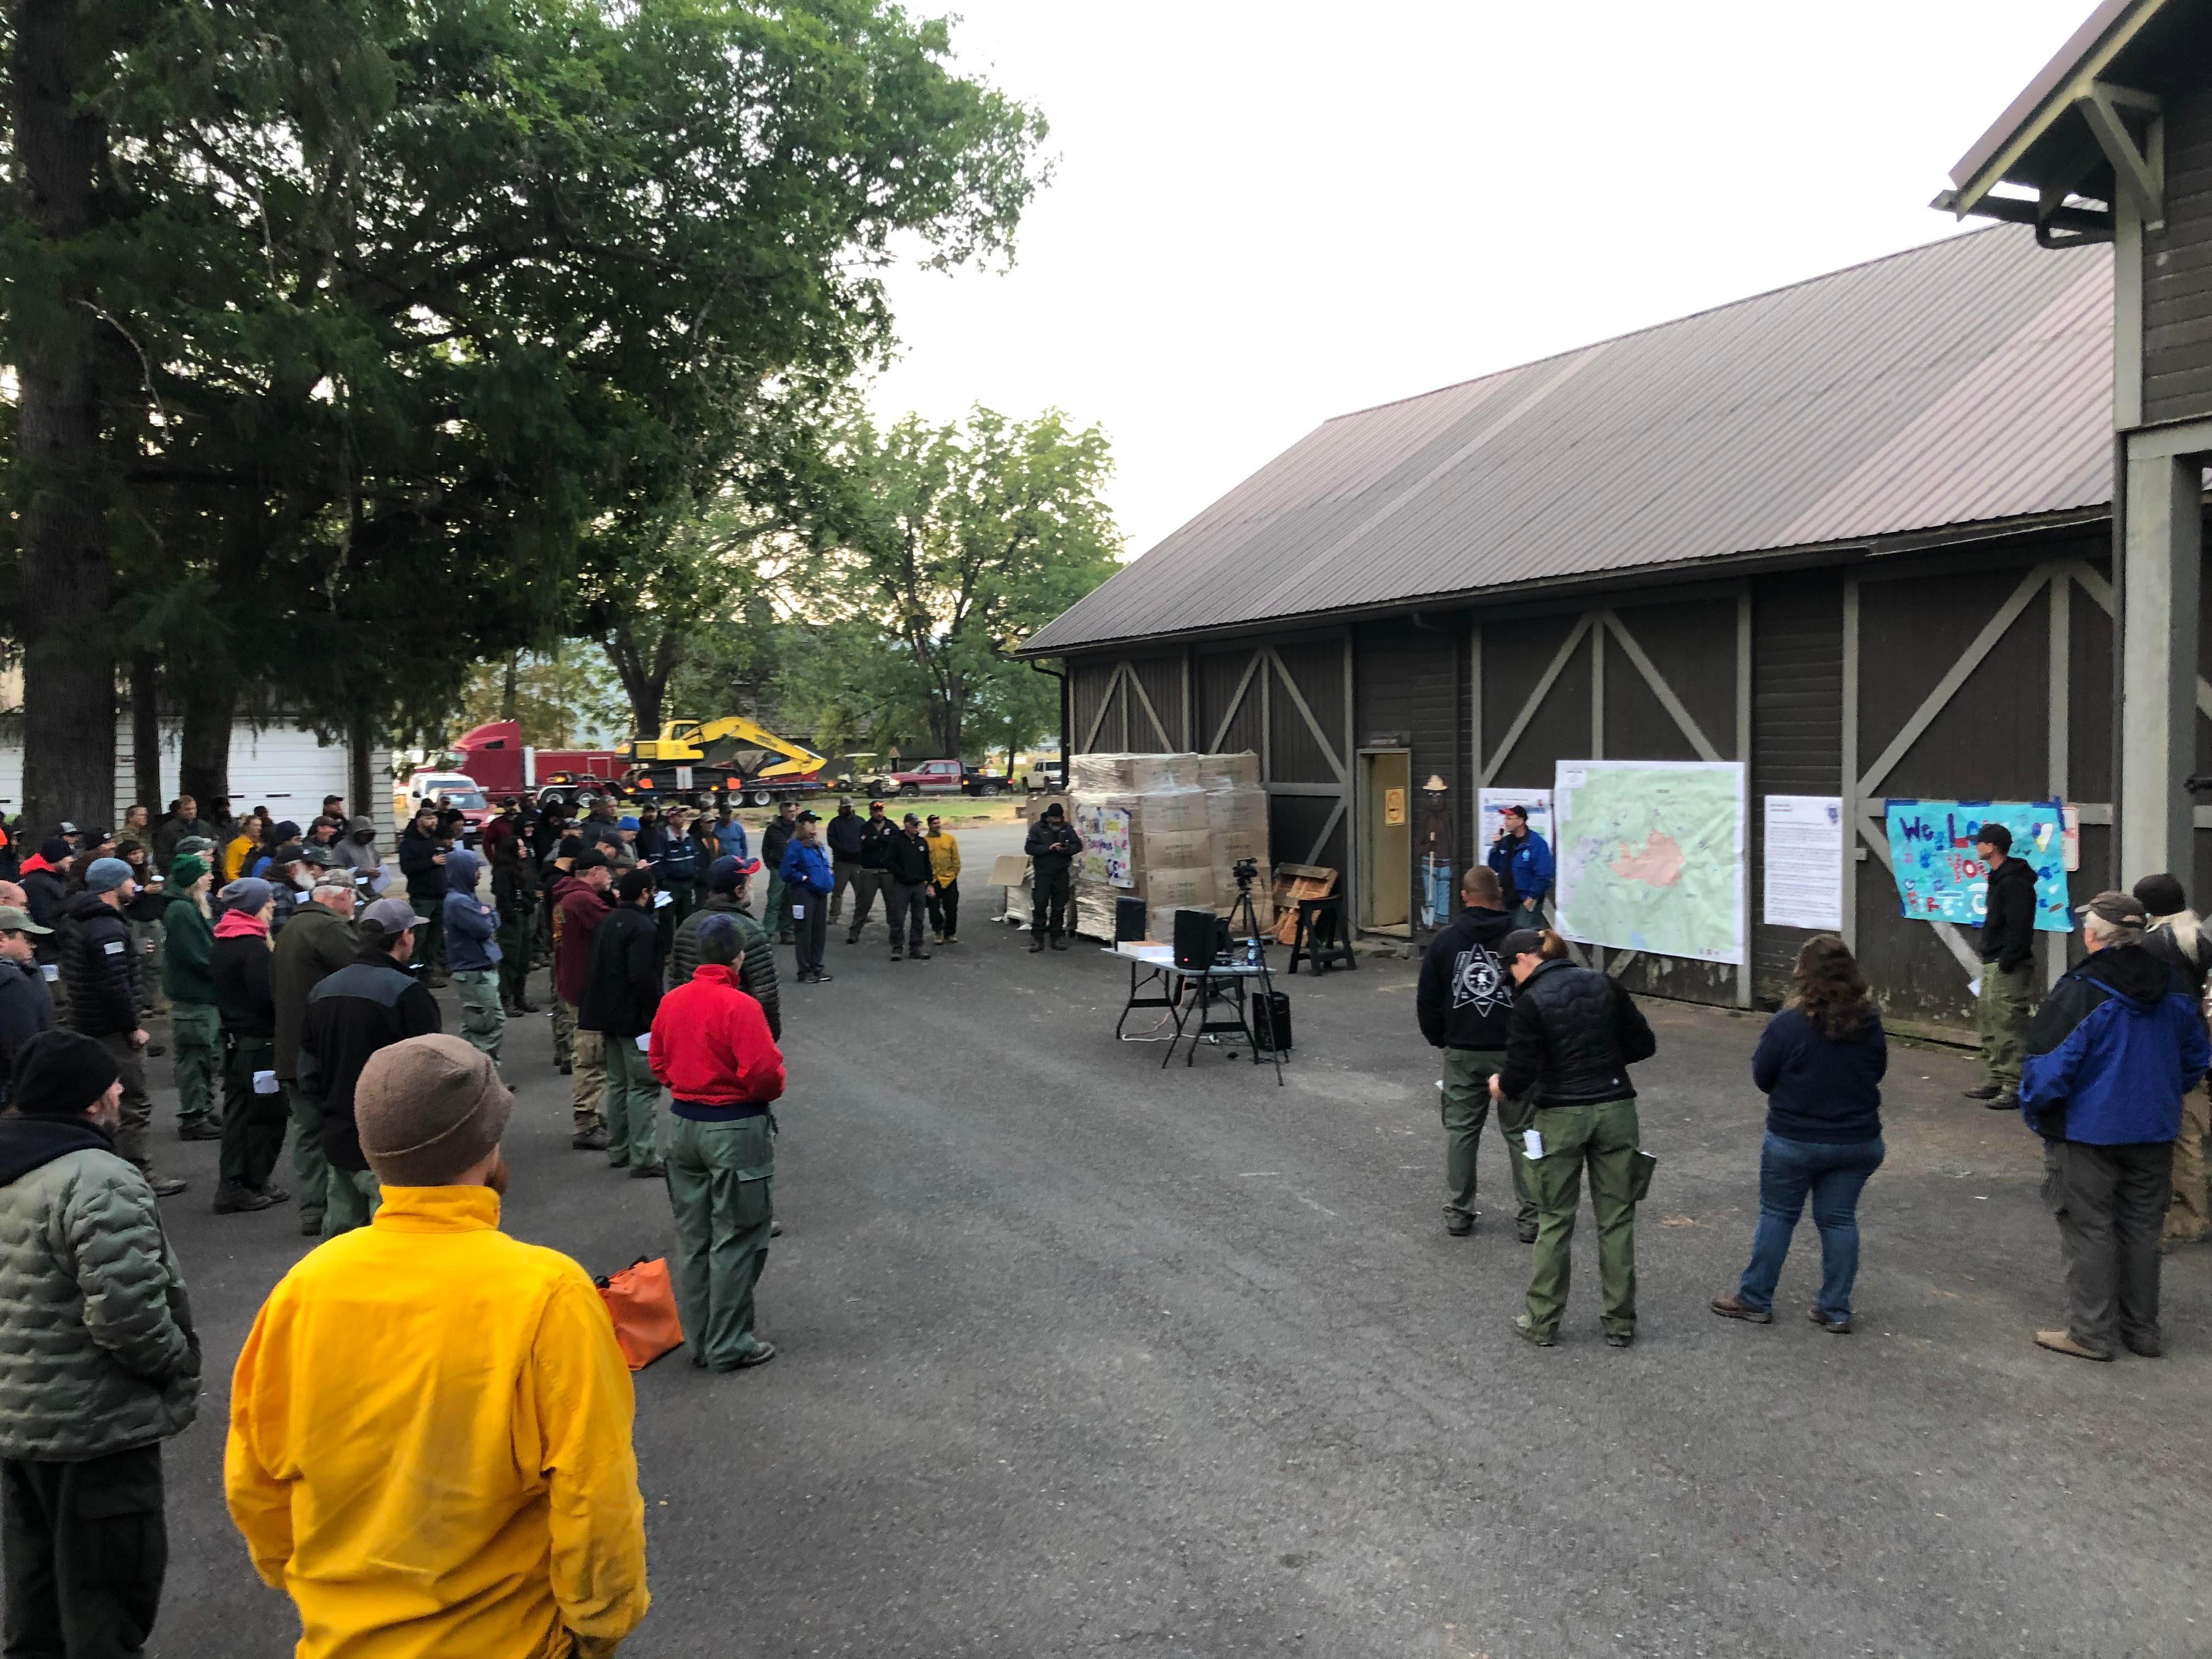 Fire personnel gather by a building where a large map of the fire is posted. Fire managers are briefing them on what is happening on the fire, the weather, assignments for the day, and other important information.